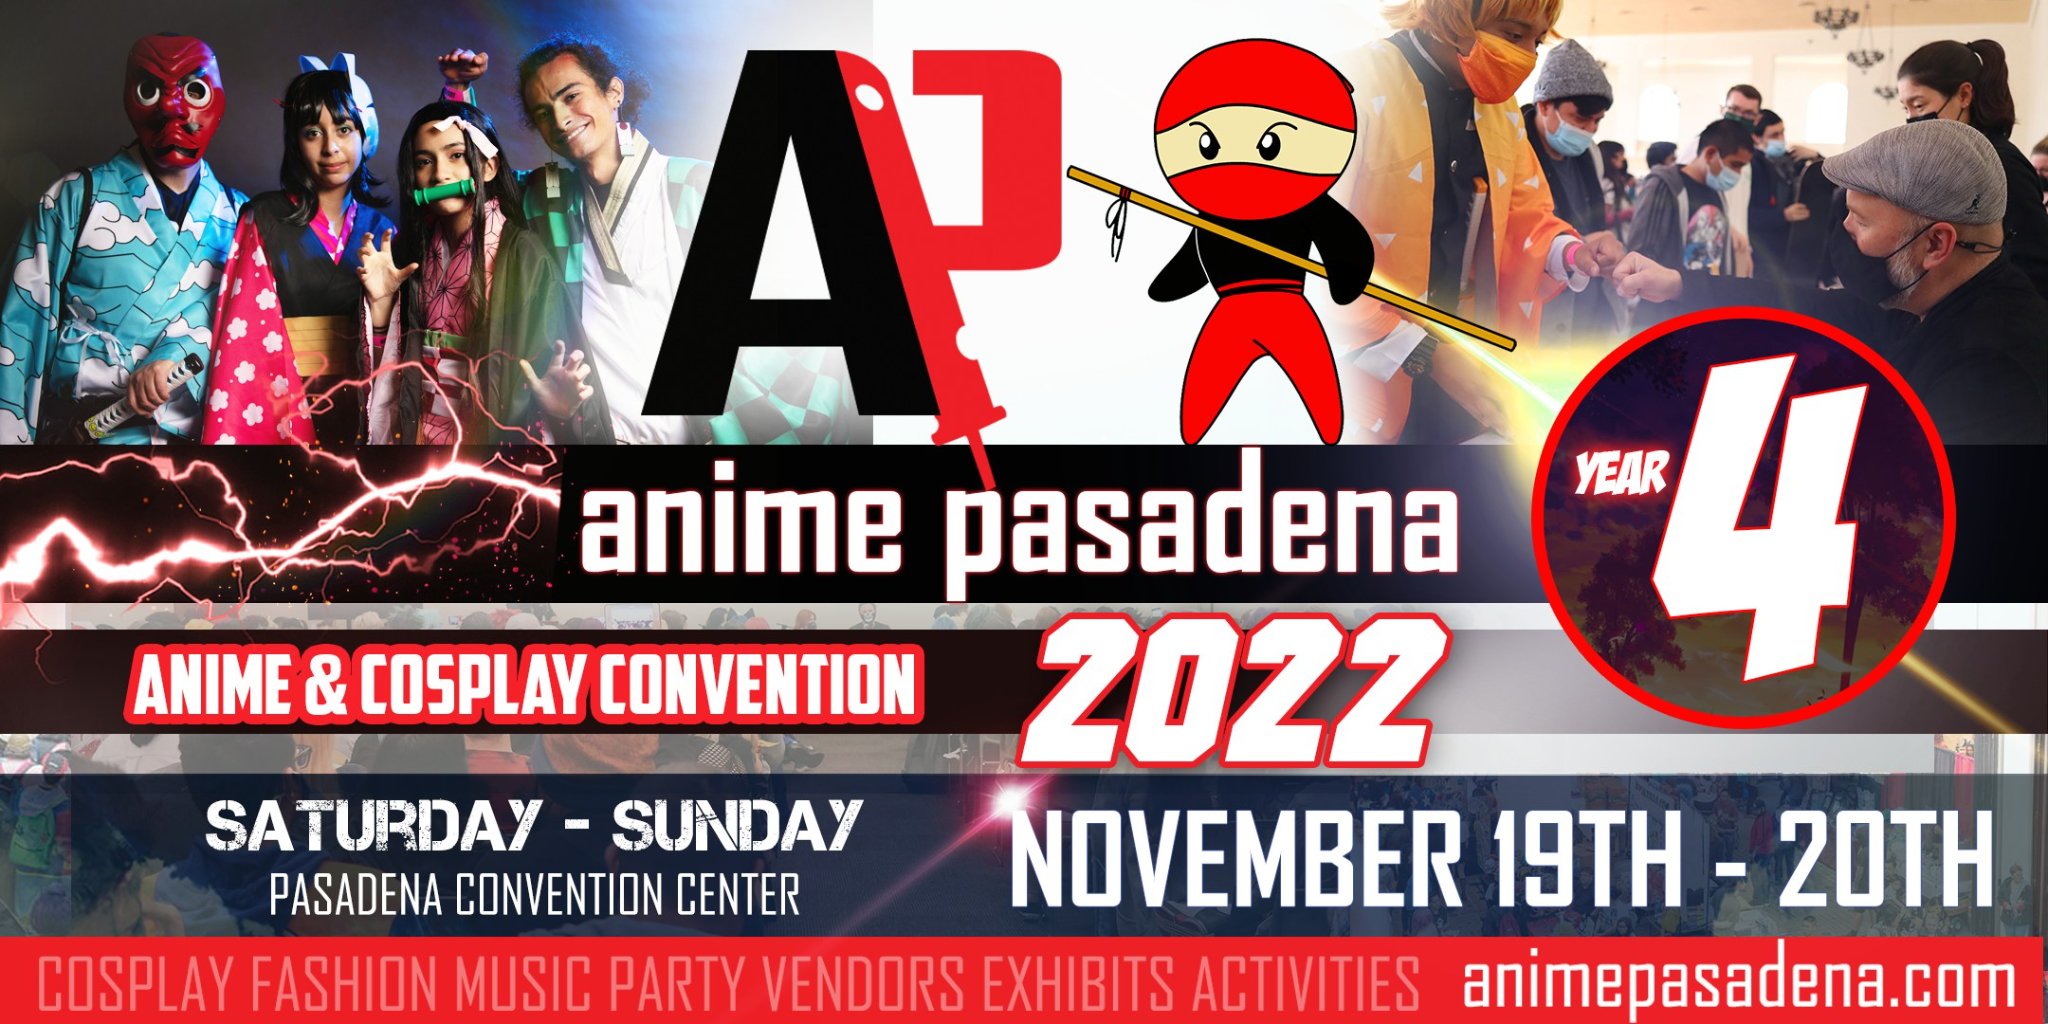 10 Largest Anime Conventions in USA - For lovers of the Japanese Culture | Anime  conventions, Anime expo, Cosplay events